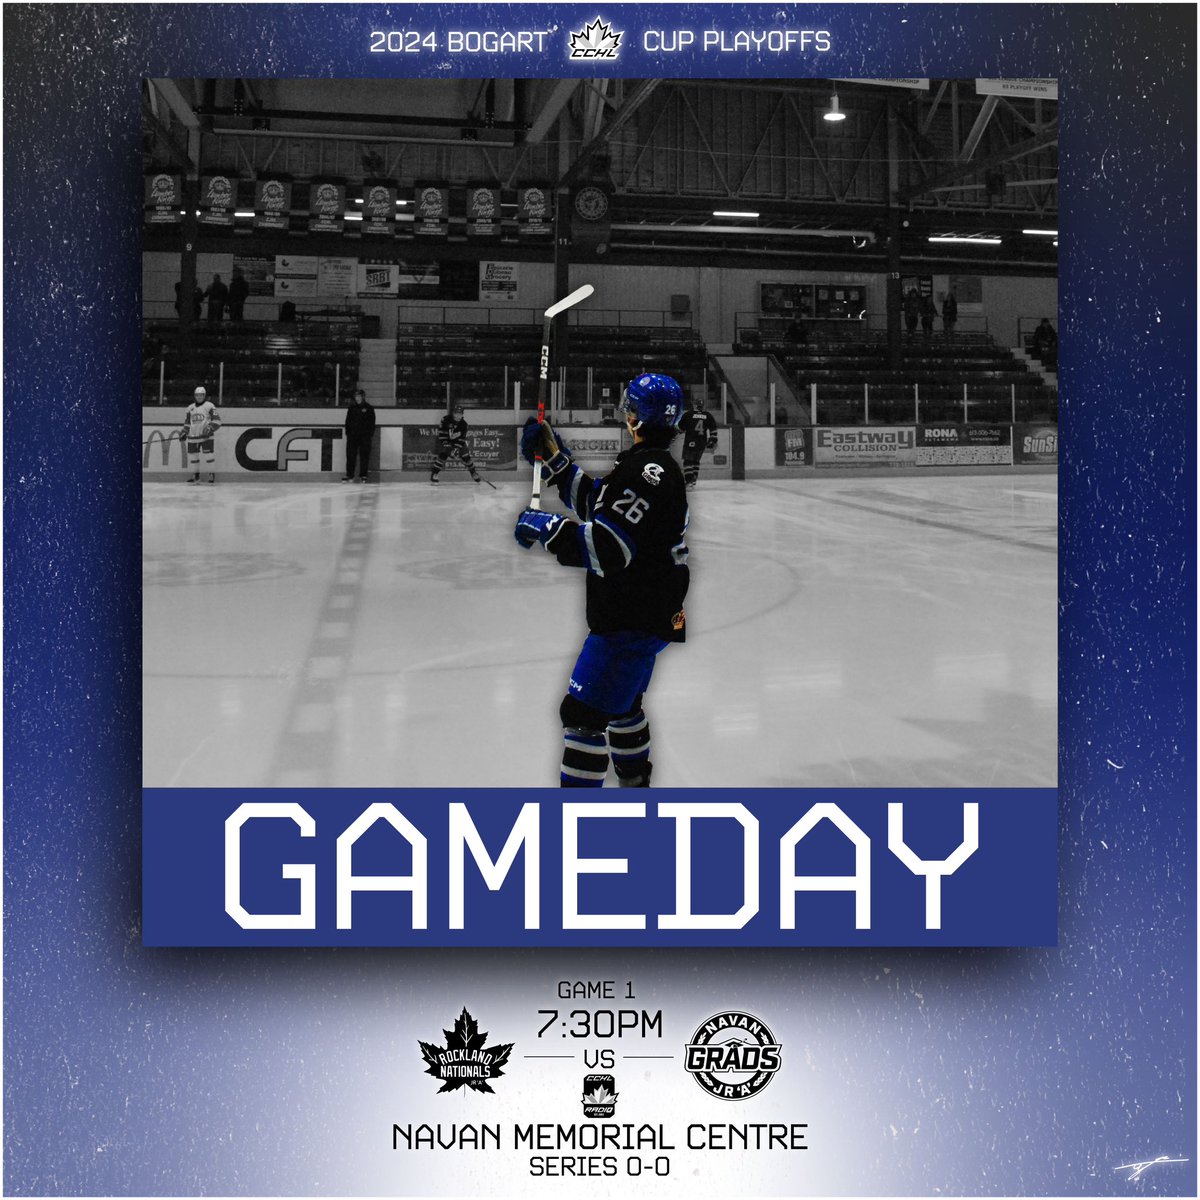 🔵⚪️GAMEDAY⚪️🔵 It’s Game Day! Time for game 1 of the 2024 Bogart Cup Semifinals as we take on the Rockland Nationals at home to kick off the series! It’s a 7:30pm puck-drop, you won’t want to miss this one #gameday #playoffs #cchl #2024bogartcup #rollgrads #wearenavan @TheCCHL